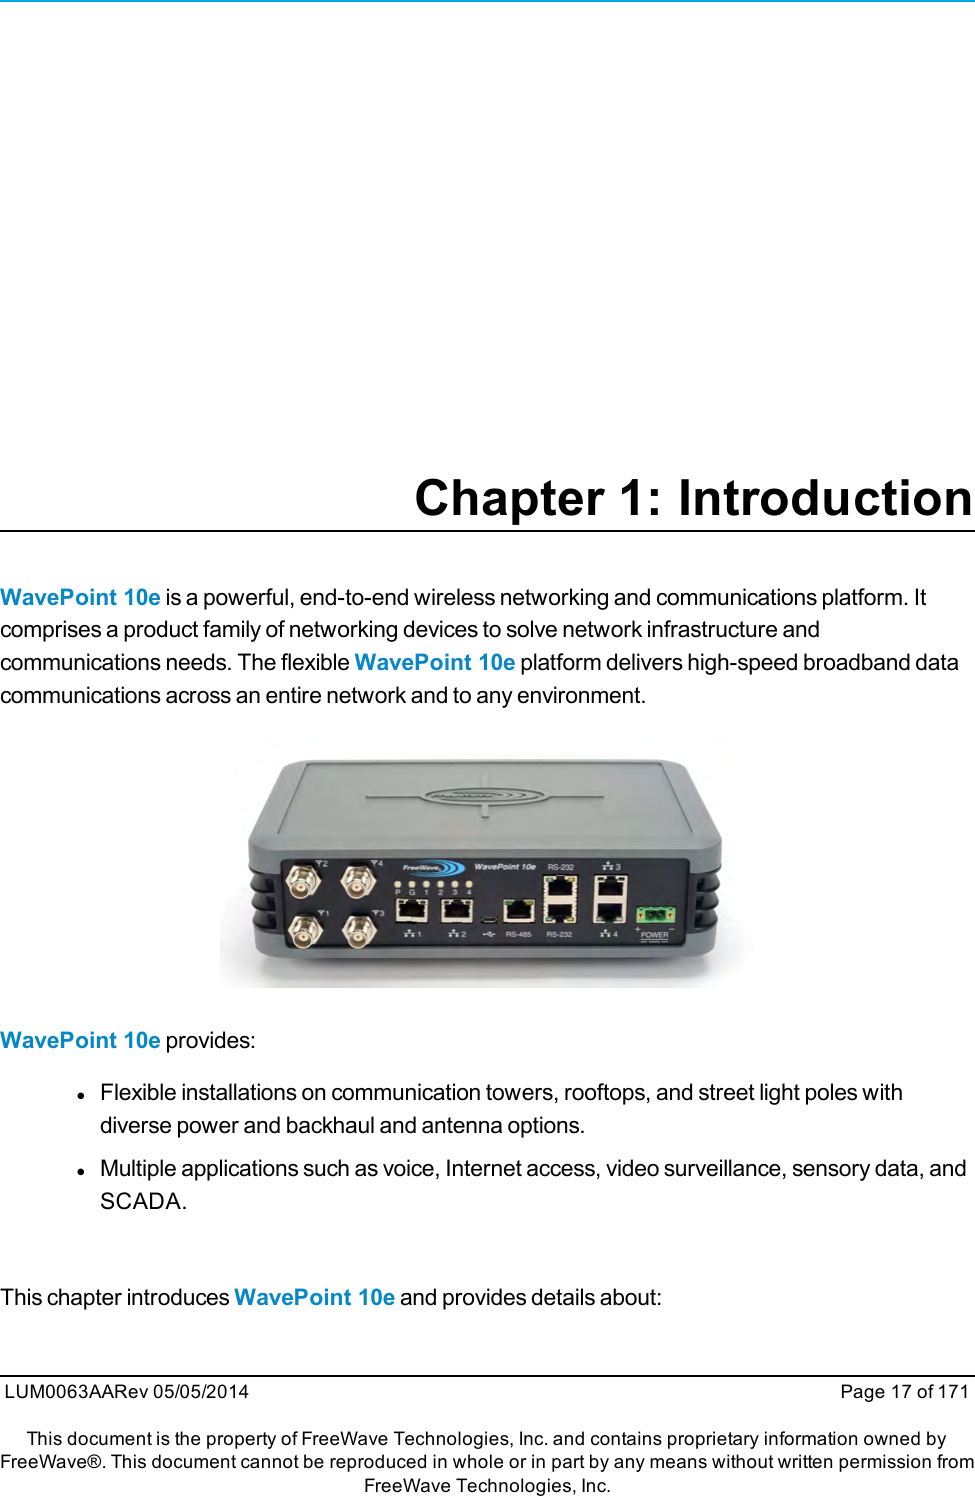 Chapter 1: IntroductionWavePoint 10e is a powerful, end-to-end wireless networking and communications platform. Itcomprises a product family of networking devices to solve network infrastructure andcommunications needs. The flexible WavePoint 10e platform delivers high-speed broadband datacommunications across an entire network and to any environment.WavePoint 10e provides:lFlexible installations on communication towers, rooftops, and street light poles withdiverse power and backhaul and antenna options.lMultiple applications such as voice, Internet access, video surveillance, sensory data, andSCADA.This chapter introduces WavePoint 10e and provides details about:LUM0063AARev 05/05/2014 Page 17 of 171This document is the property of FreeWave Technologies, Inc. and contains proprietary information owned byFreeWave®. This document cannot be reproduced in whole or in part by any means without written permission fromFreeWave Technologies, Inc.